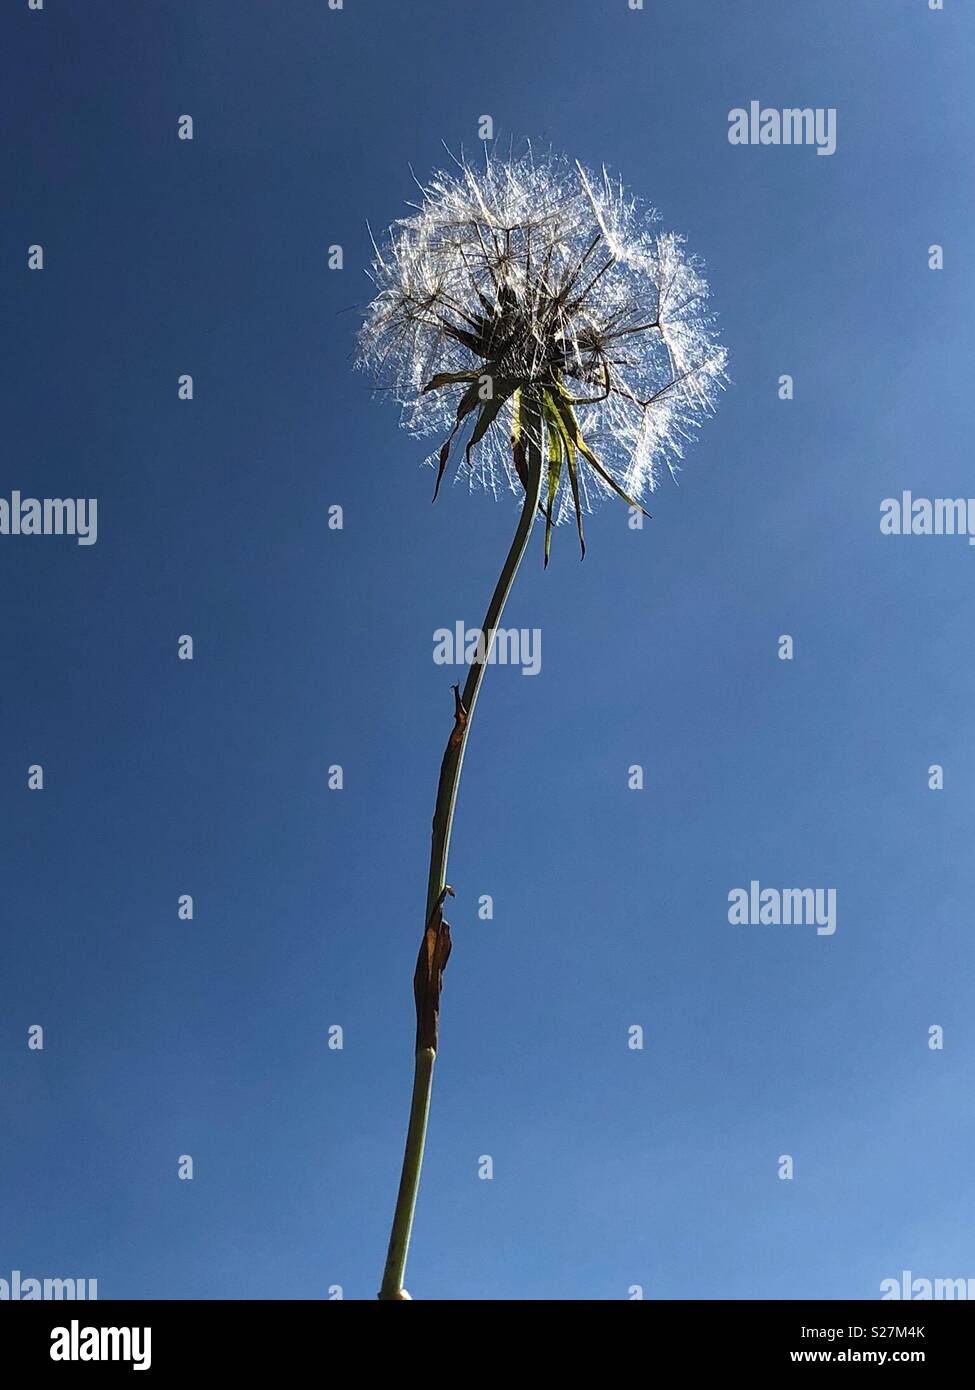 Plant seed head sparkling in the sun with clear, blue sky background Stock Photo